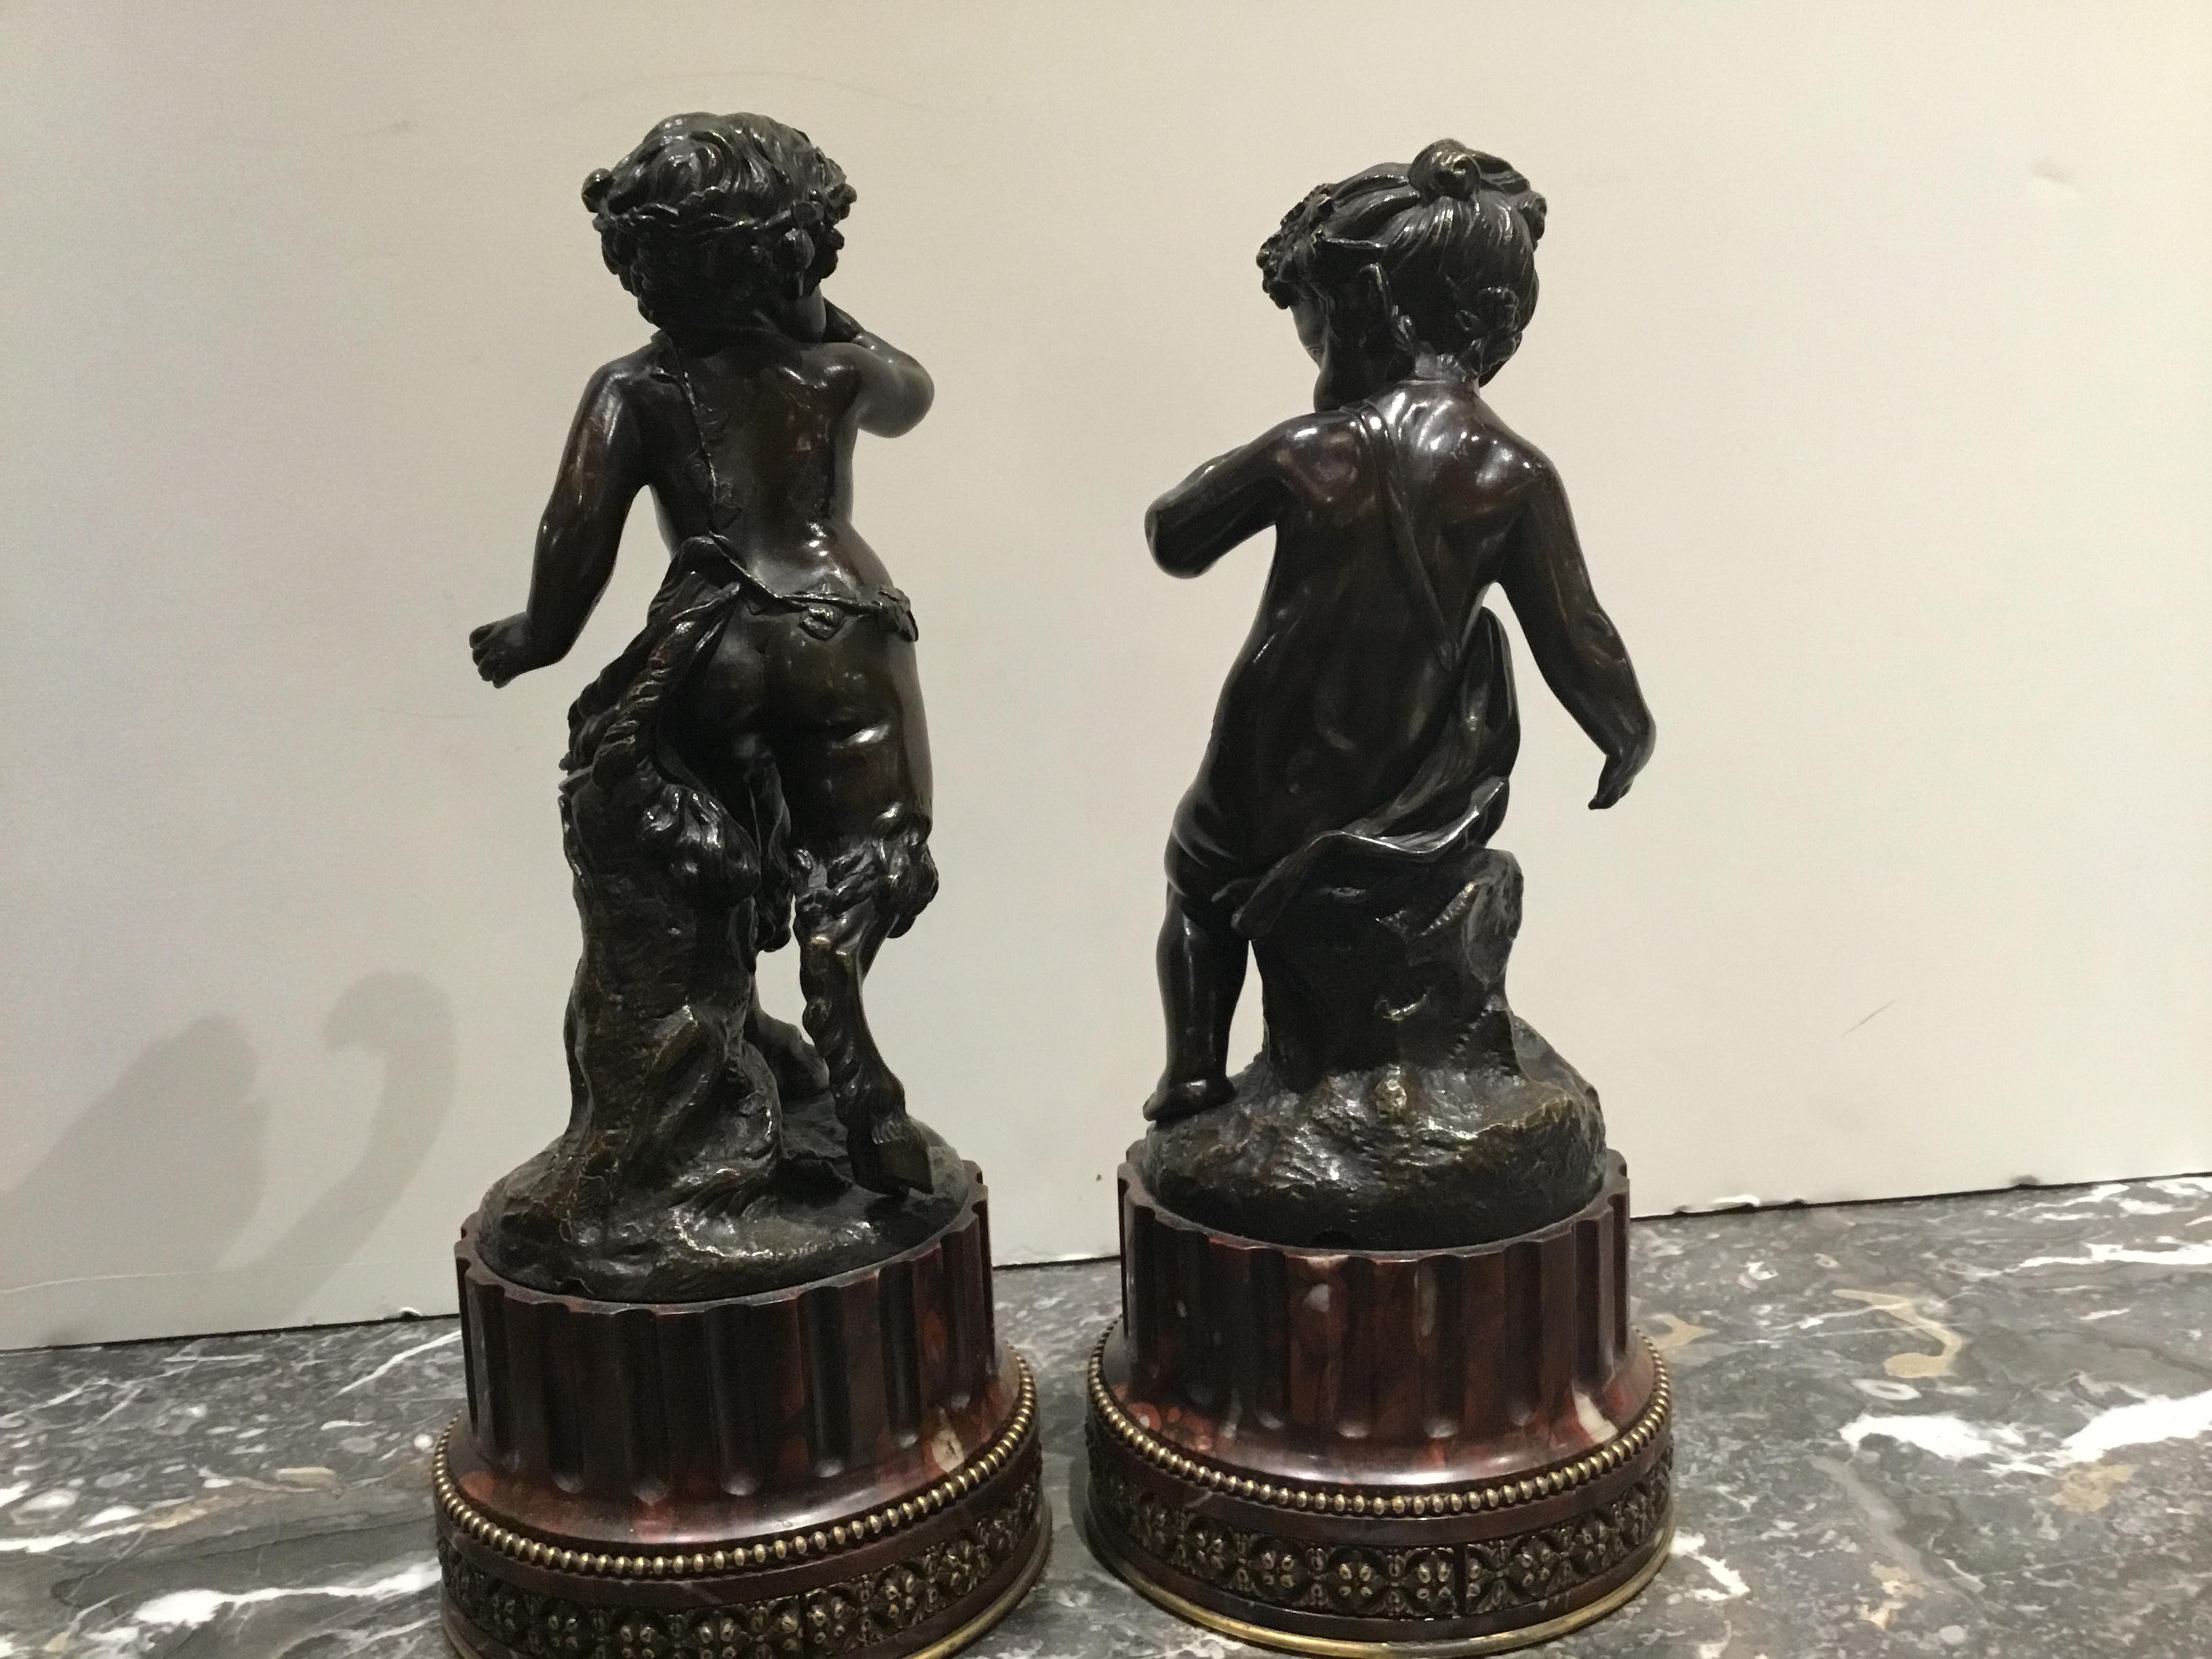 Pair of exceptional French bronze sculptures of a Nympth and Satyr both signed in
The bronze “Clodion” (Claude Michael Clodion) the sculptures set on rouge marble bases.